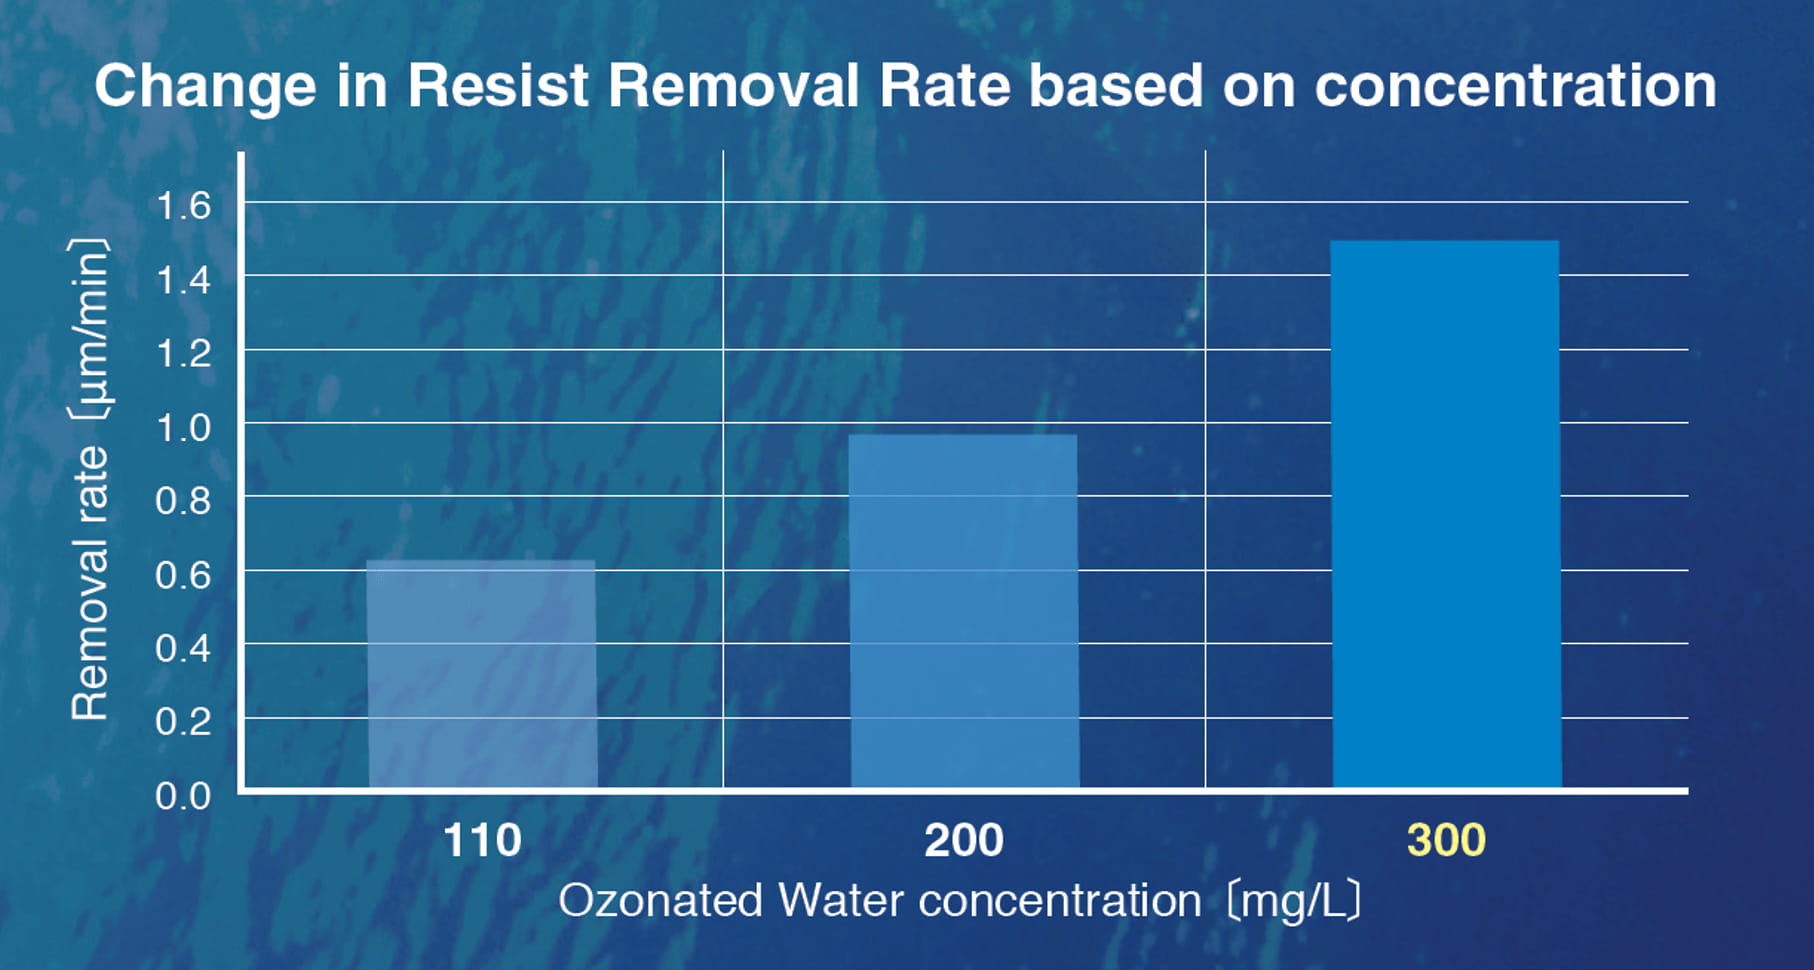 Change in Resist Removal Rate based on concentration